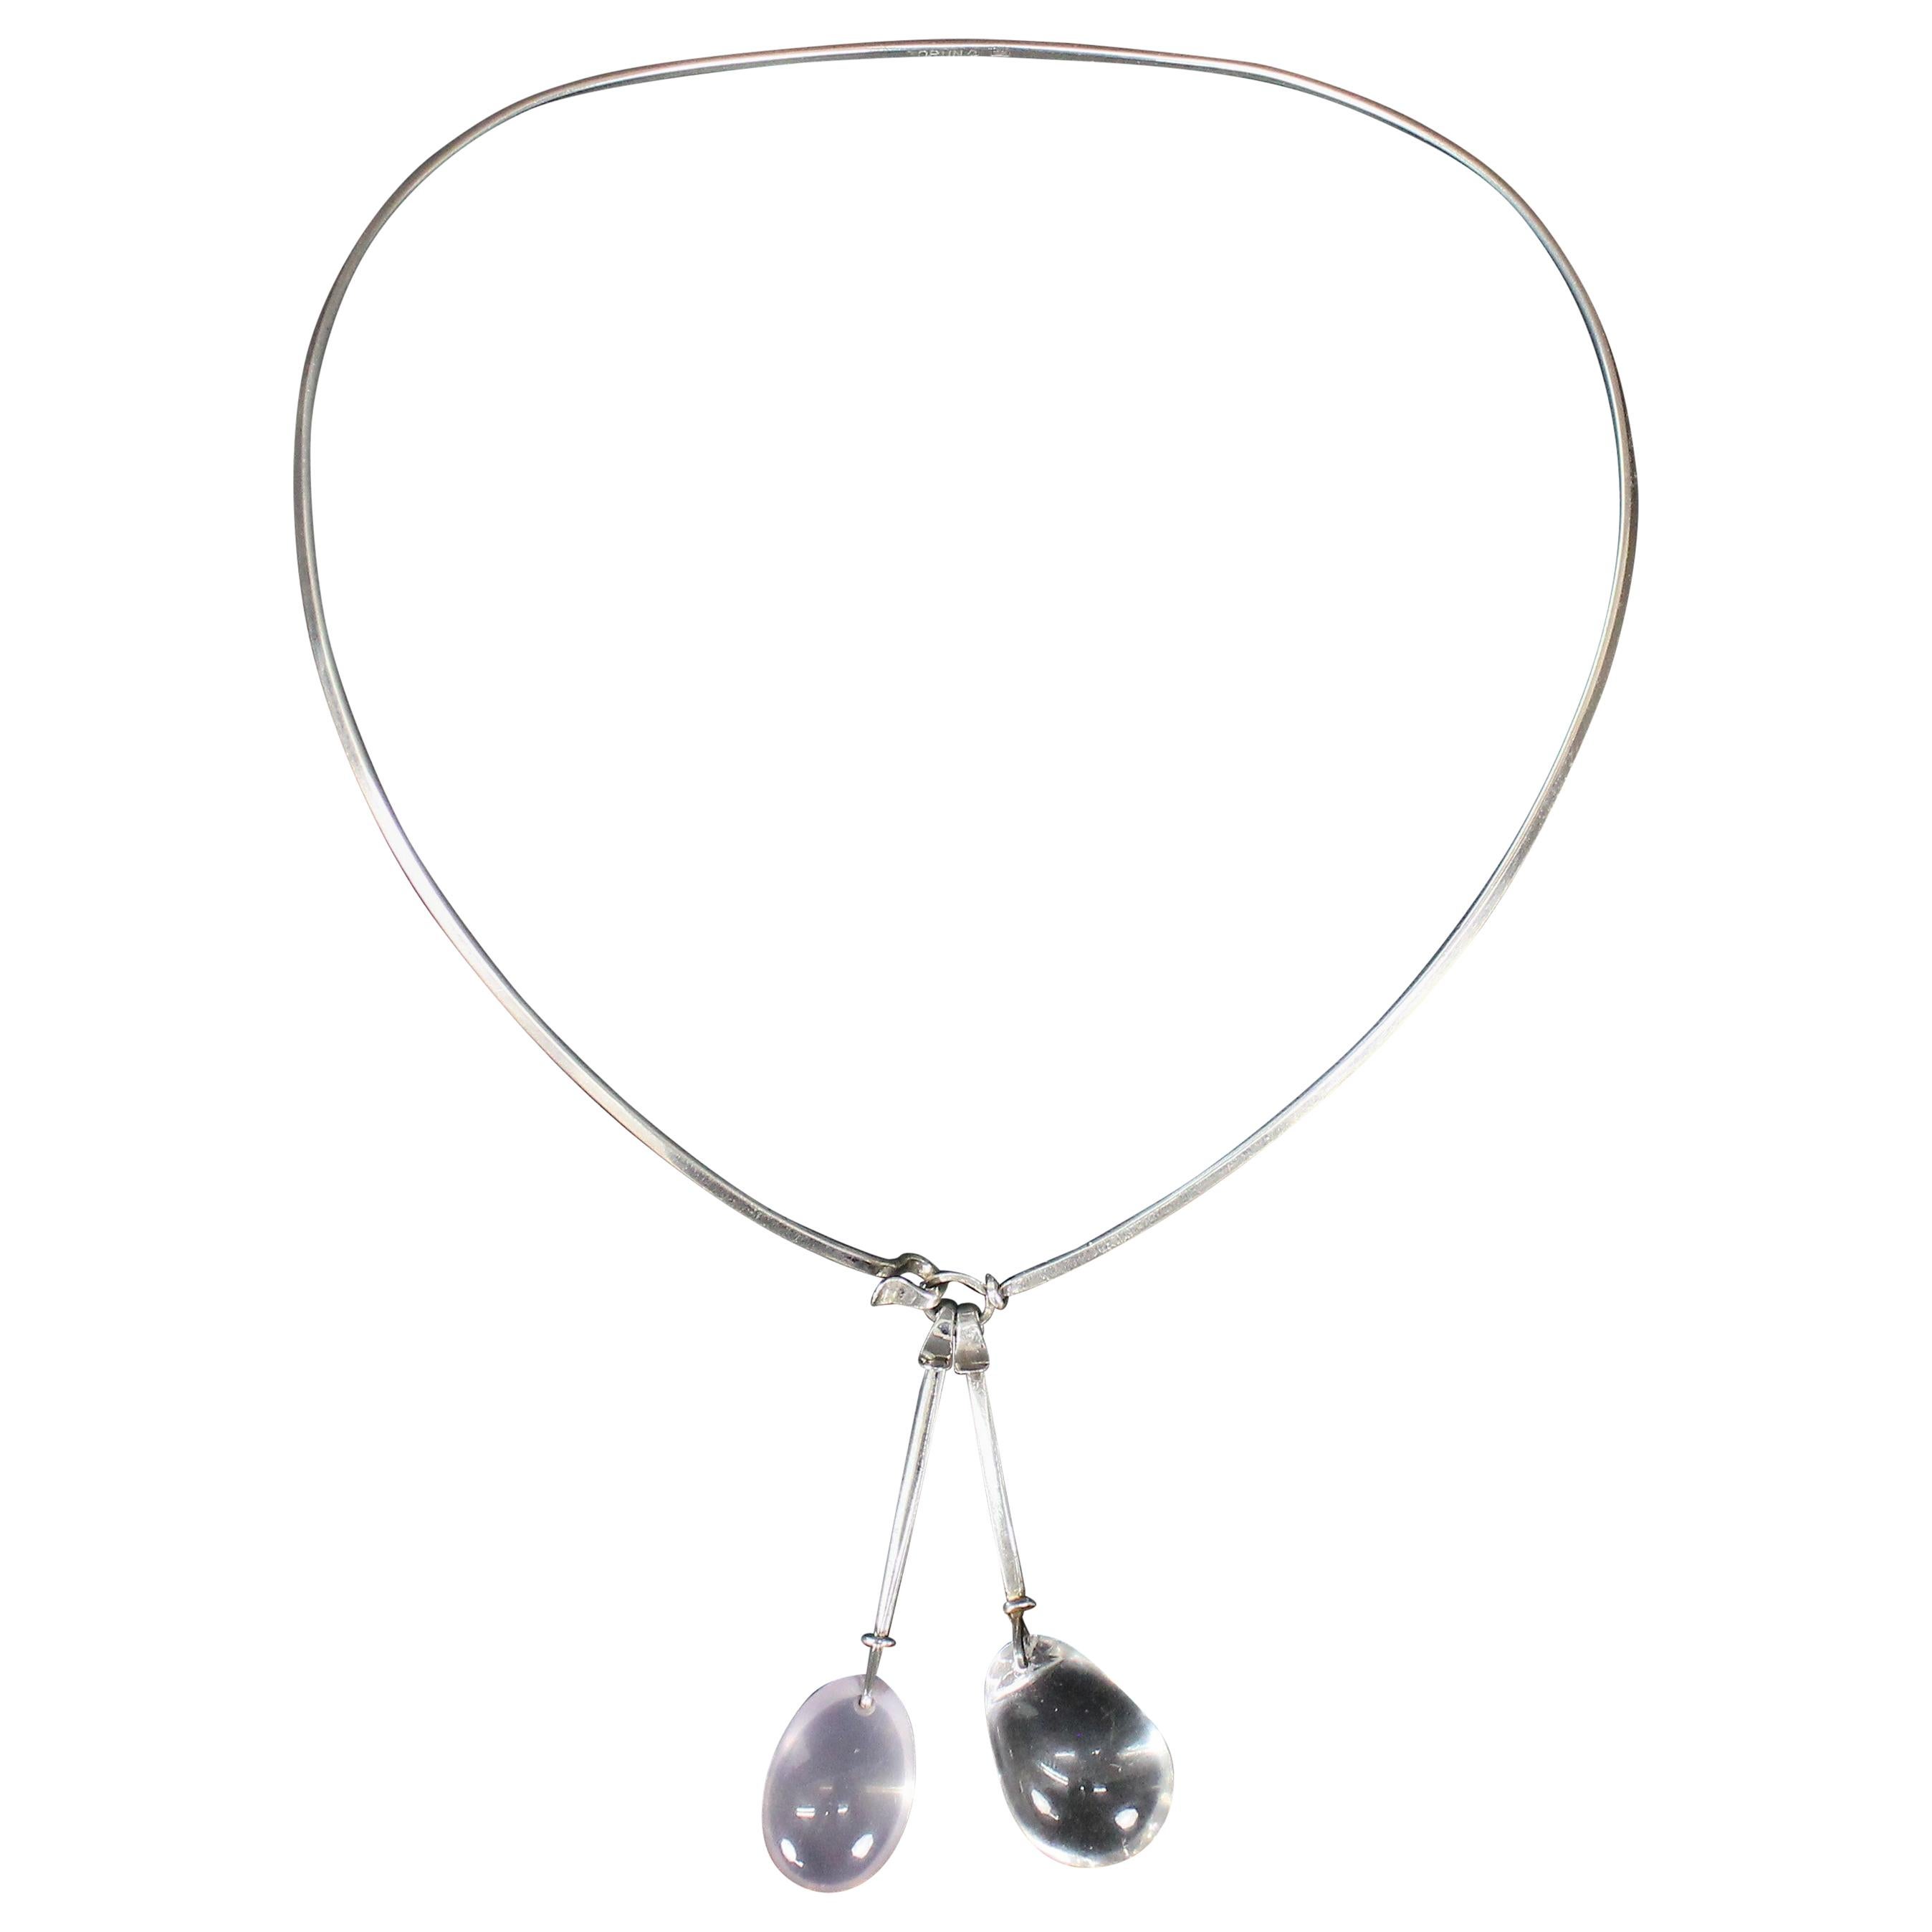 This necklace is made by herself in her own workshop way before she made these for Georg Jensen. 
Made in silver with two drop pendants, one cabochon-cut rose quartz, and one cabochon-cut rock crystal. 
All three parts are marked 